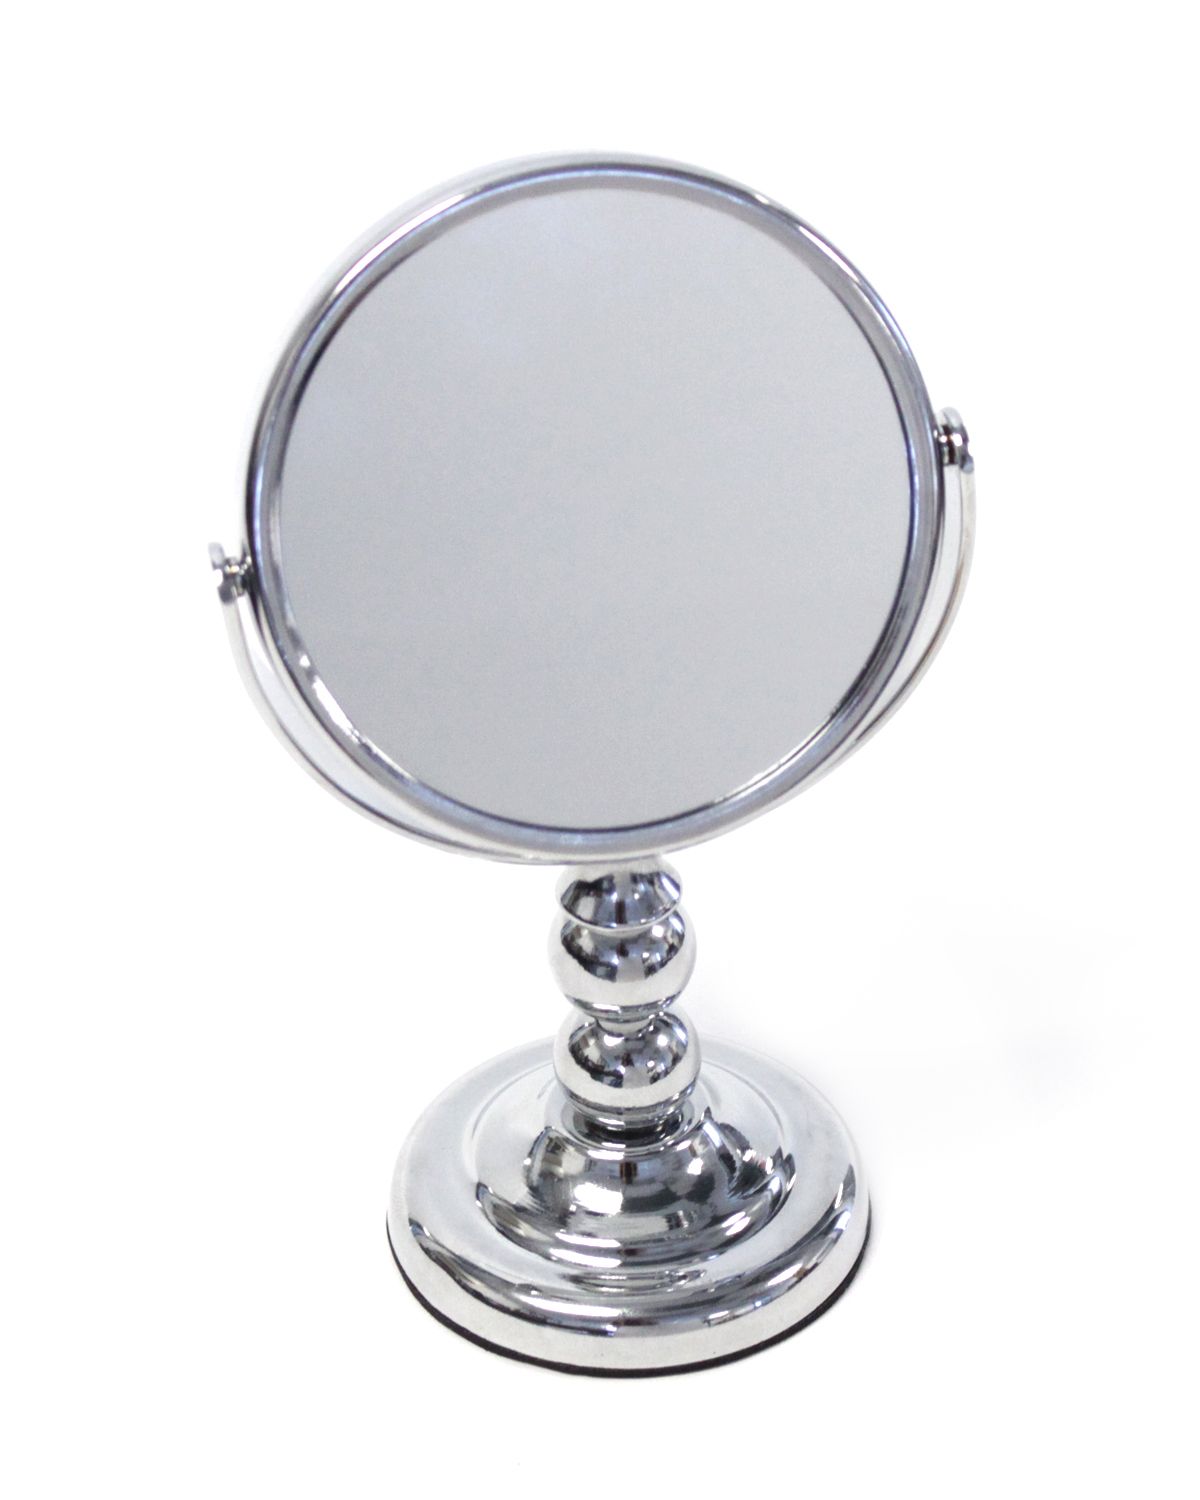 Splash Home Tia Mini Round Makeup Double Sided Magnifying Standing Intended For Single Sided Chrome Makeup Stand Mirrors (View 8 of 15)